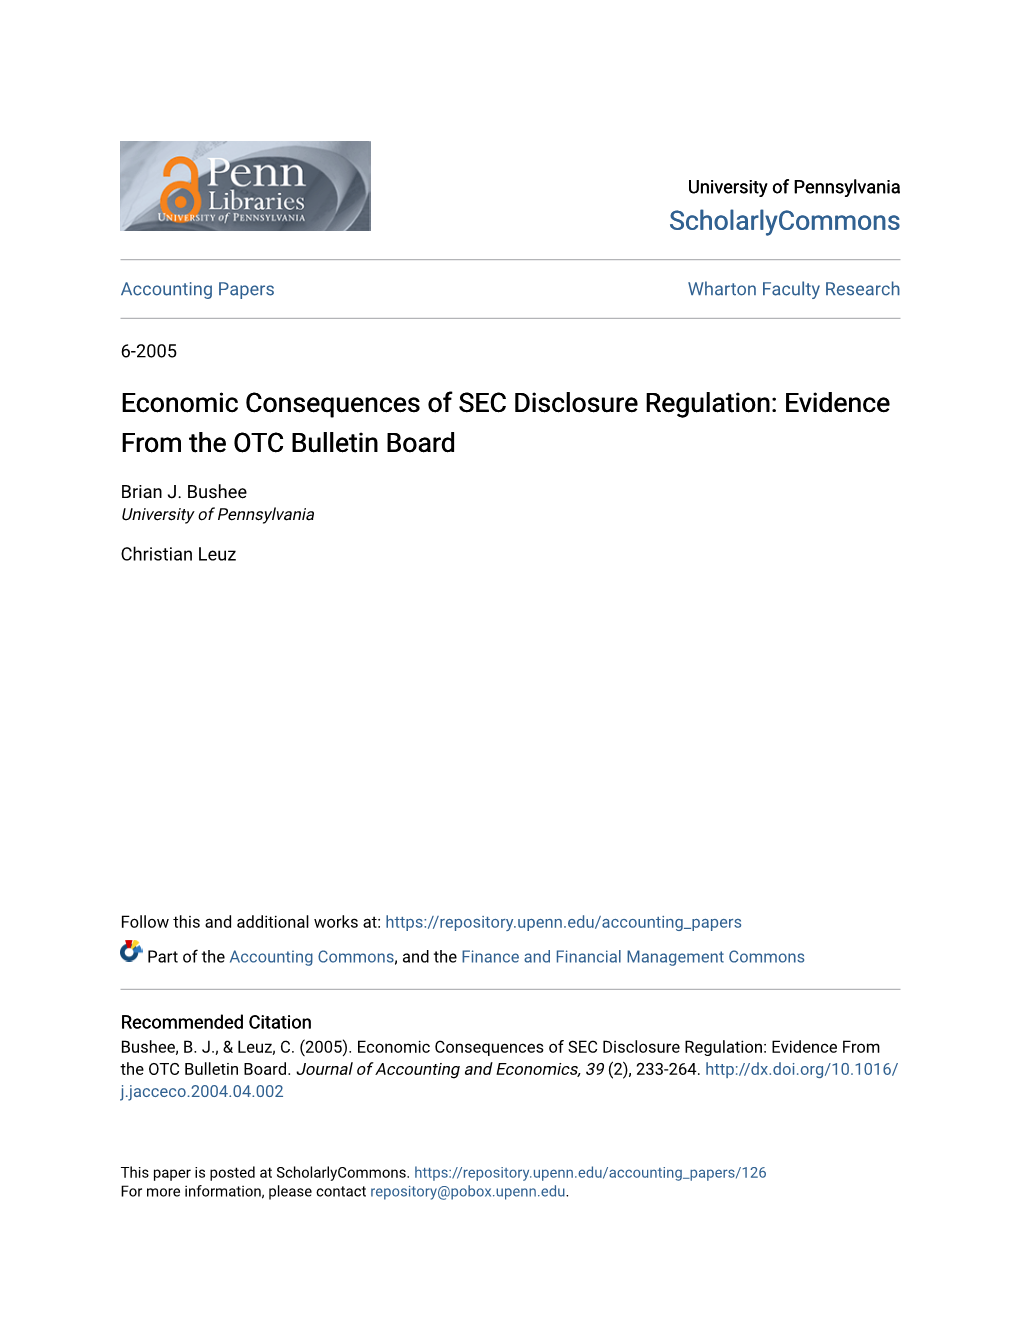 Economic Consequences of SEC Disclosure Regulation: Evidence from the OTC Bulletin Board